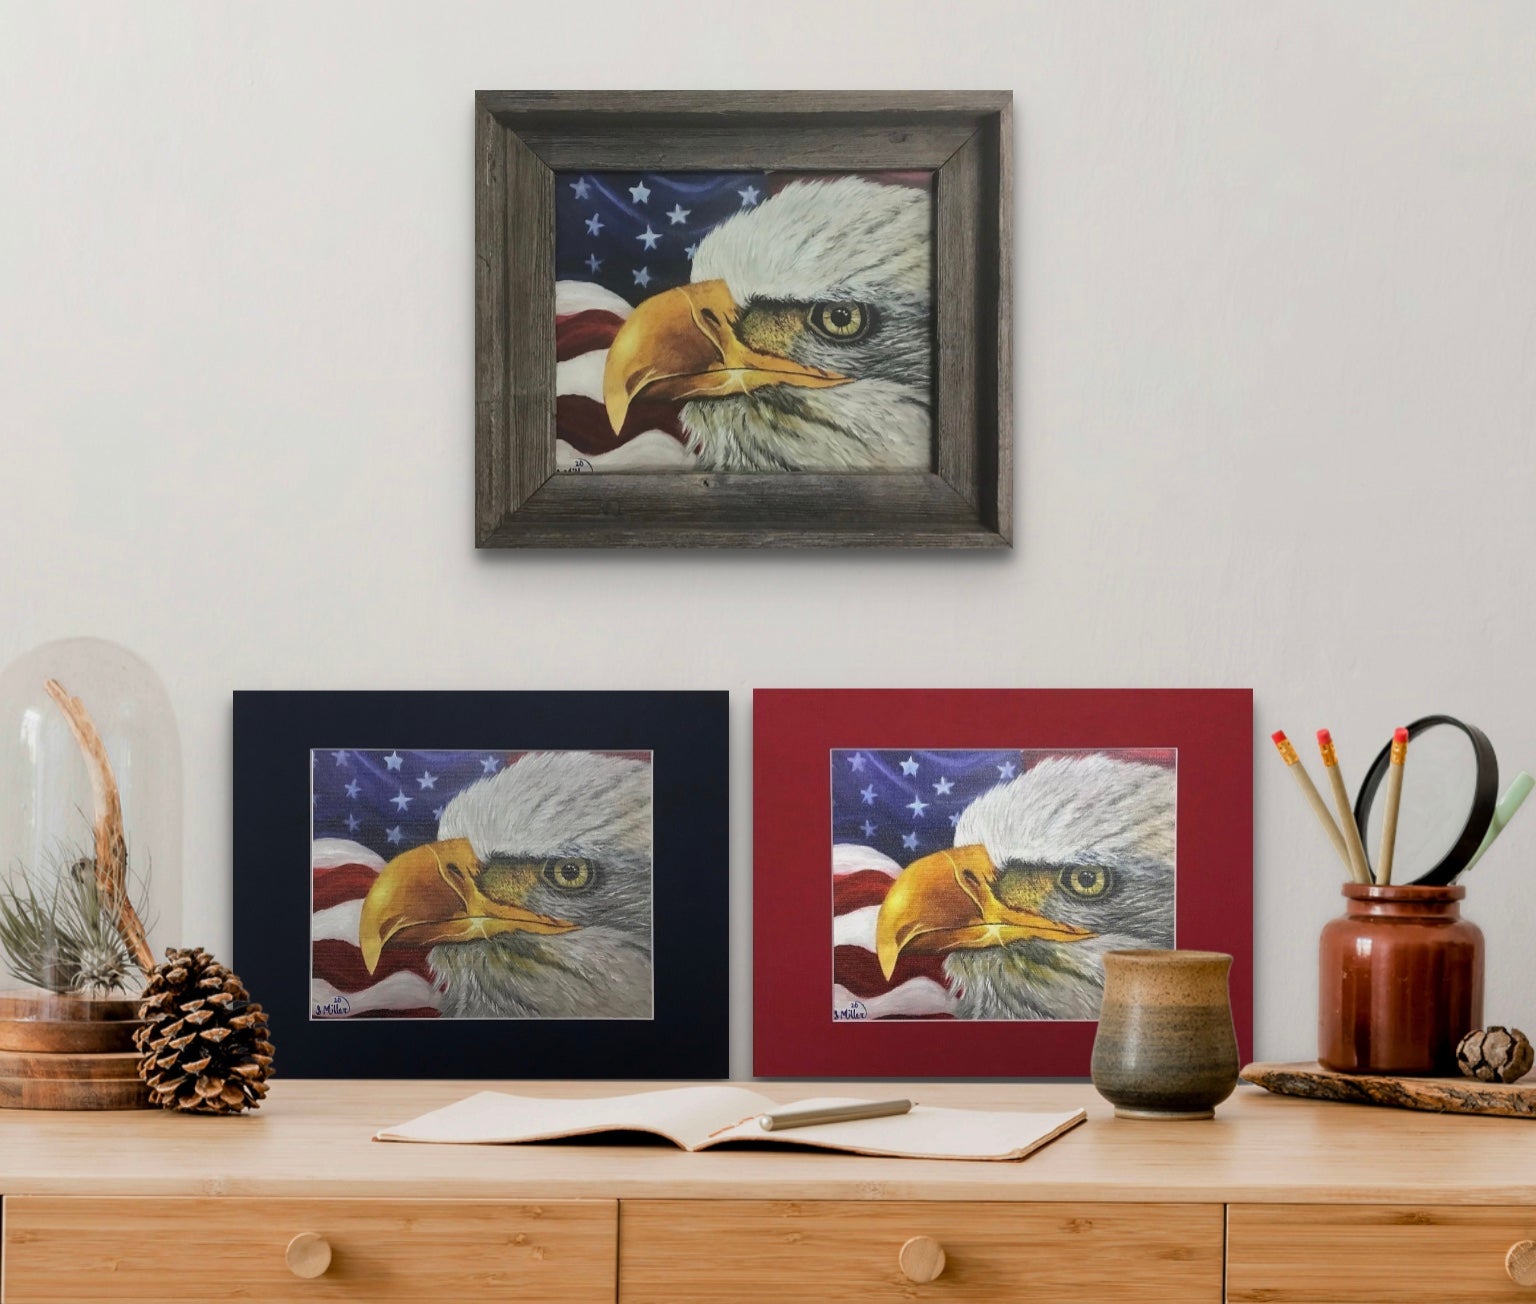 Three prints in various color mats and frames of bald eagle against a waving American flag backdrop